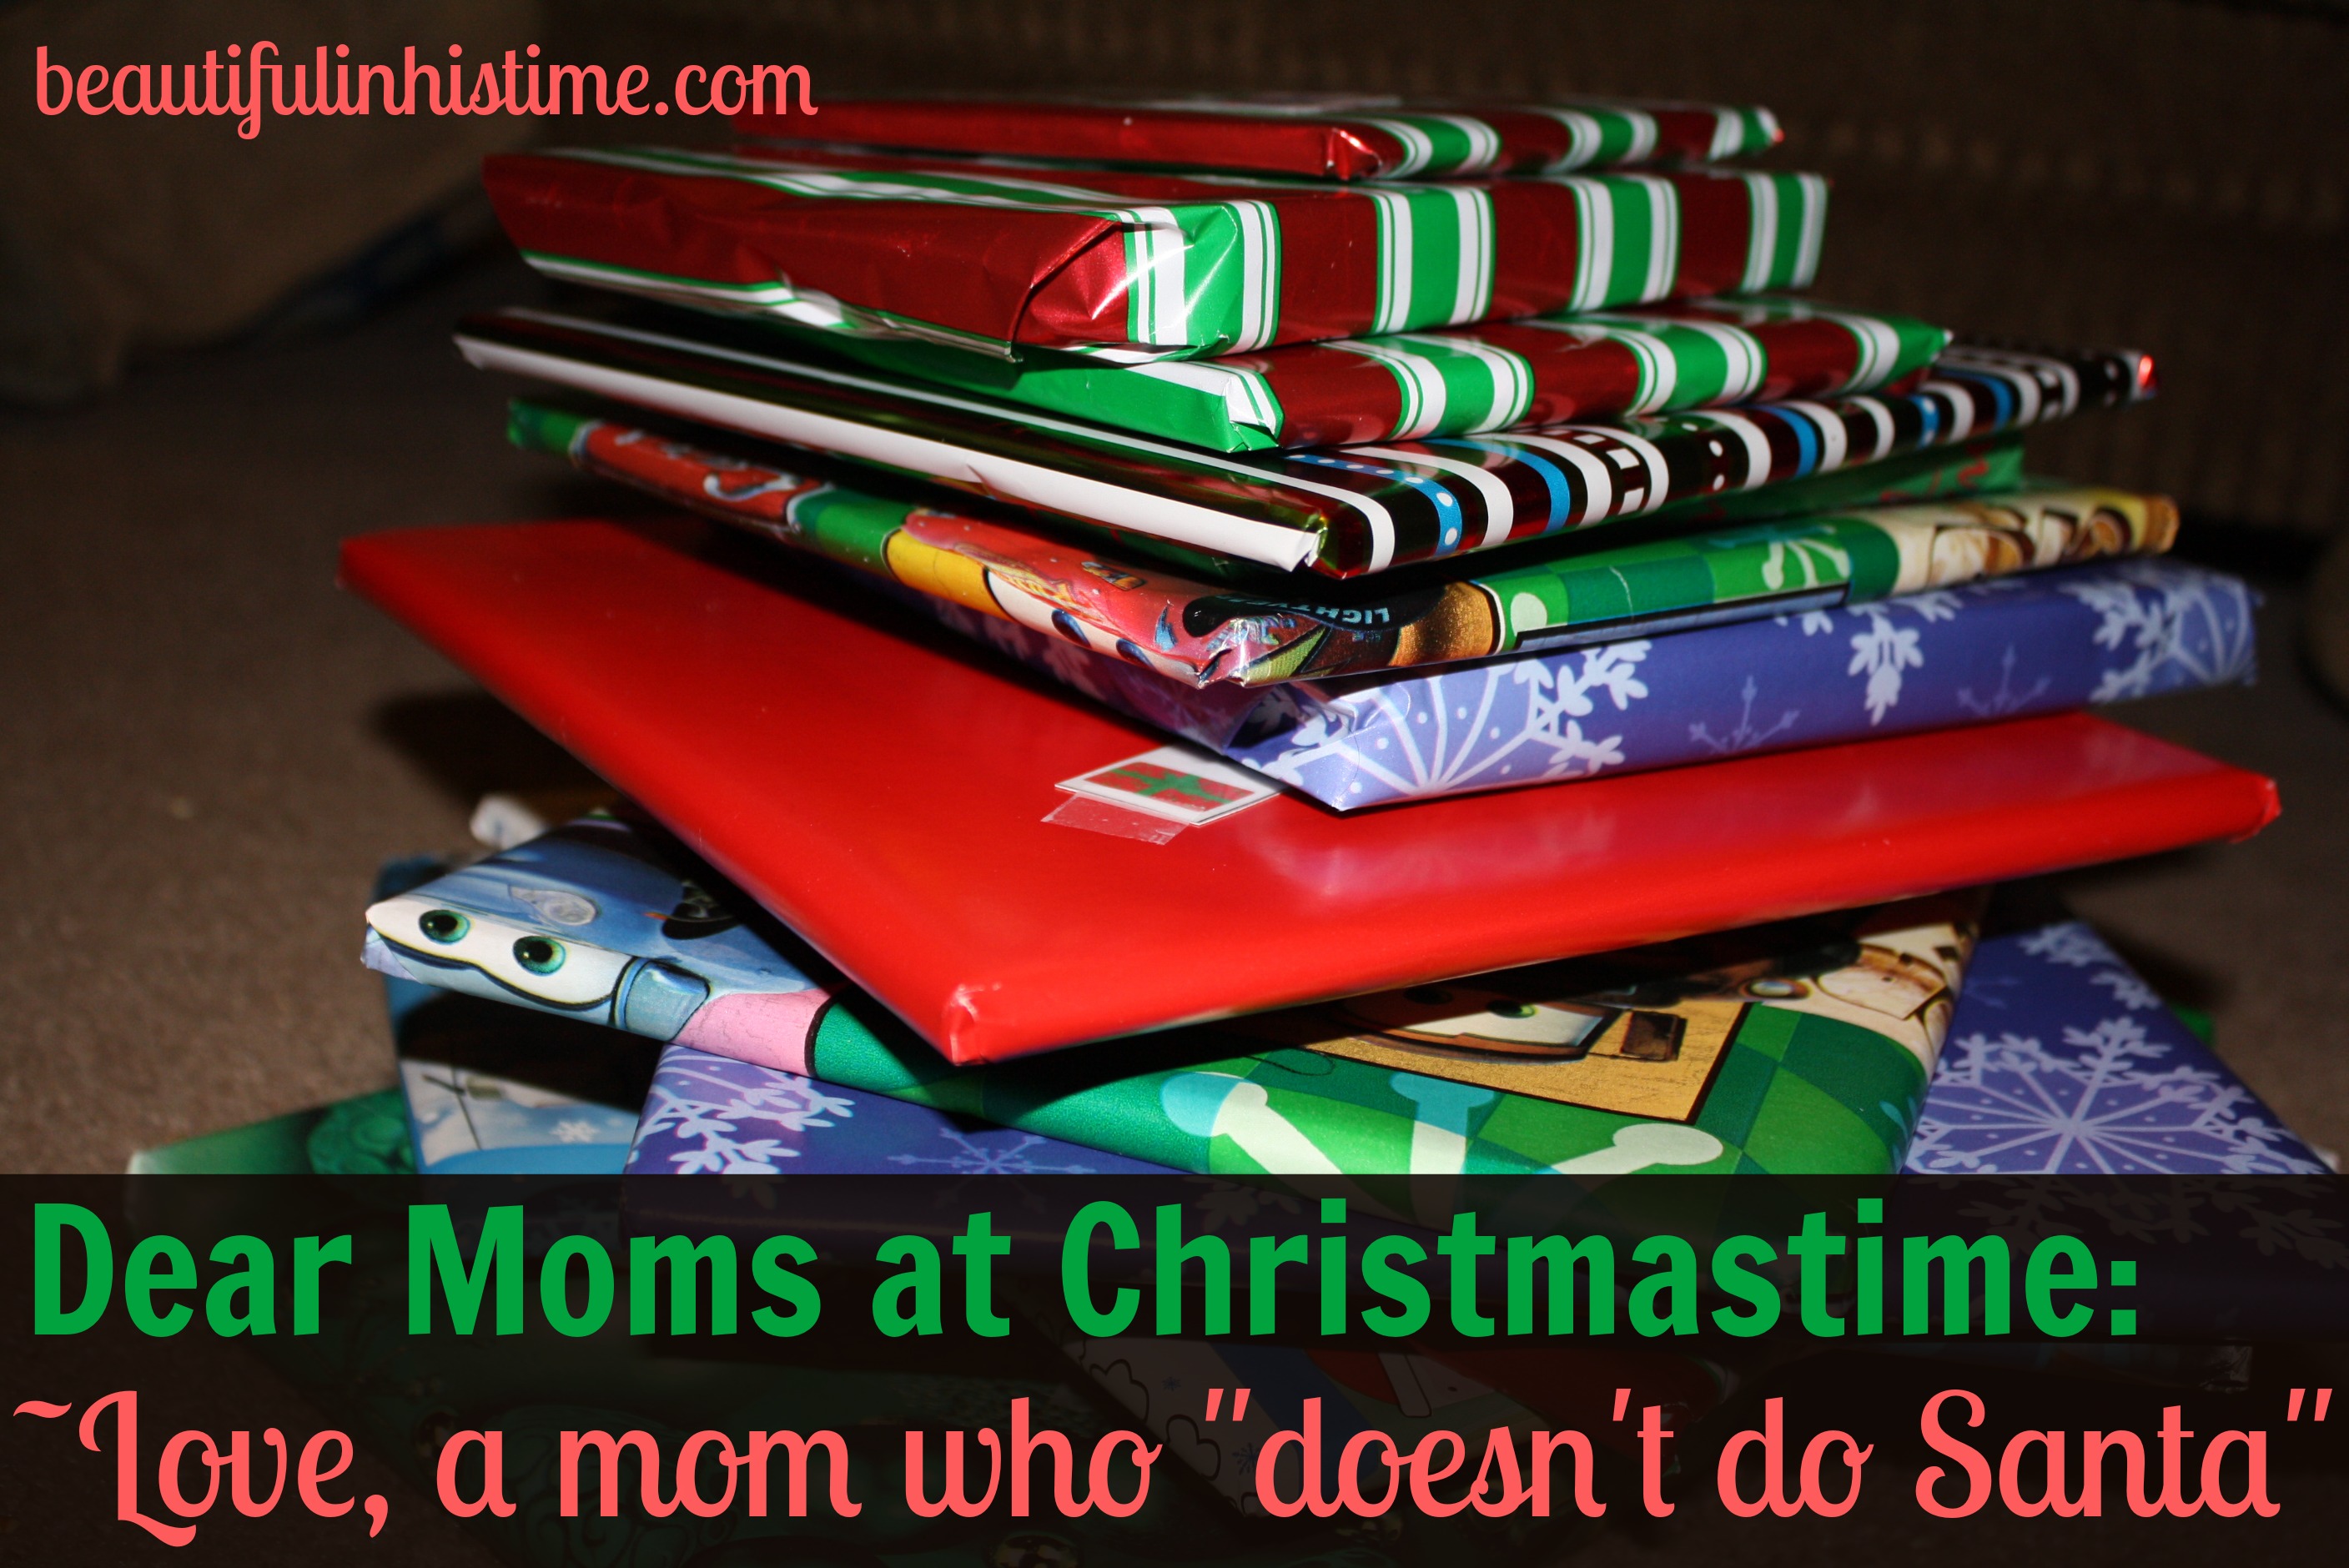 Dear Moms at Christmastime